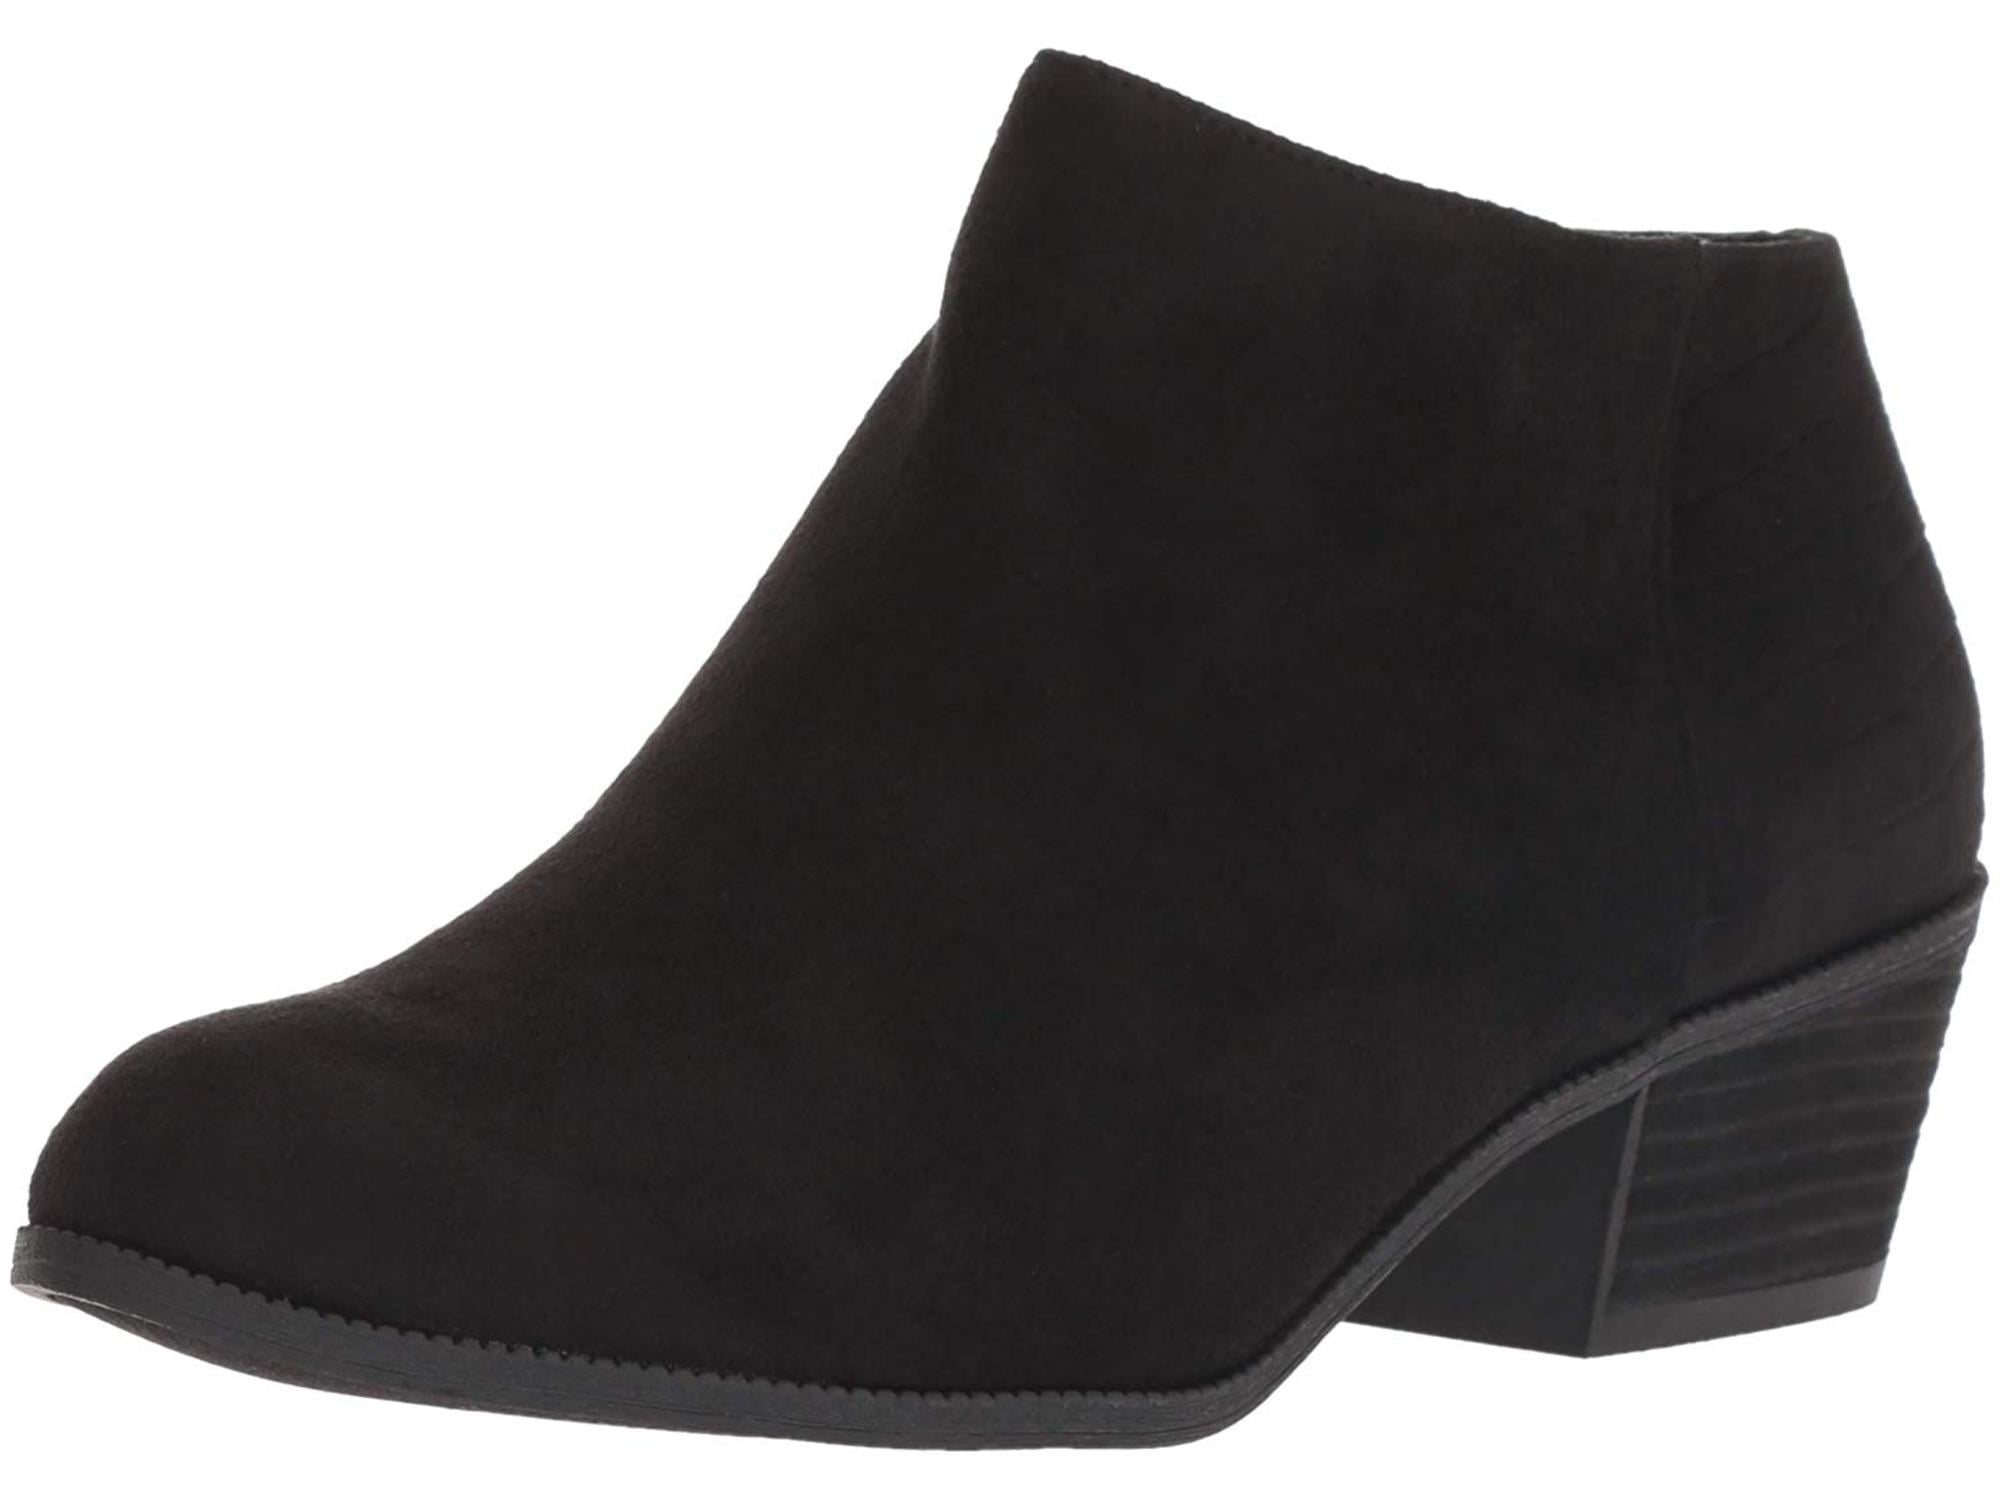 Dr. Scholl's Womens Brendel Almond Toe Ankle Fashion Boots - Walmart.com